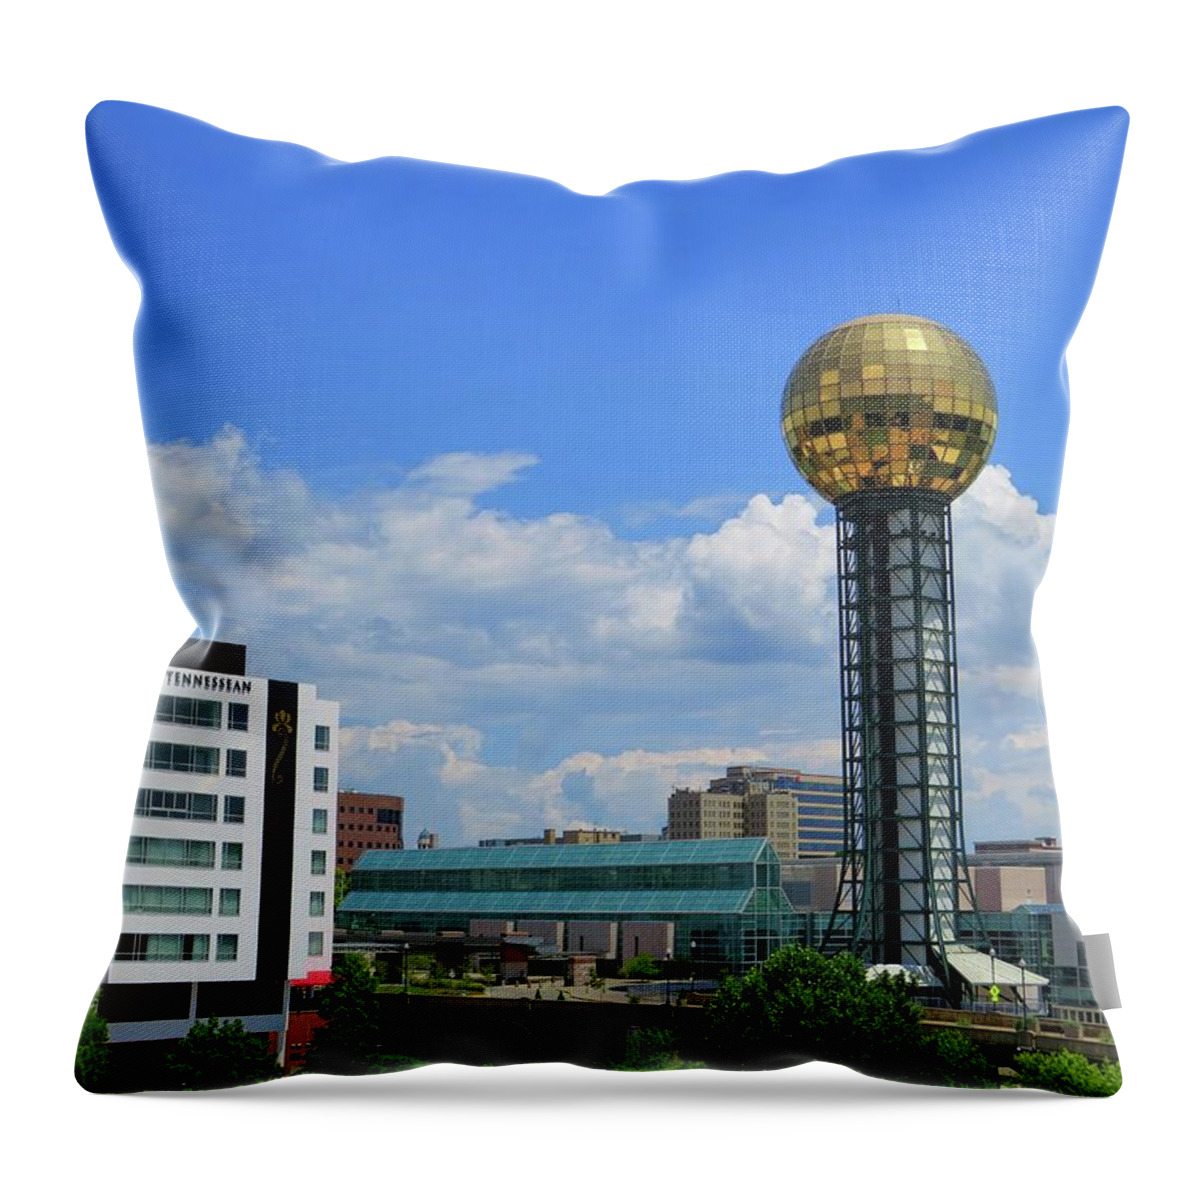 Sunsphere Throw Pillow featuring the photograph Knoxville Sunsphere by Connor Beekman